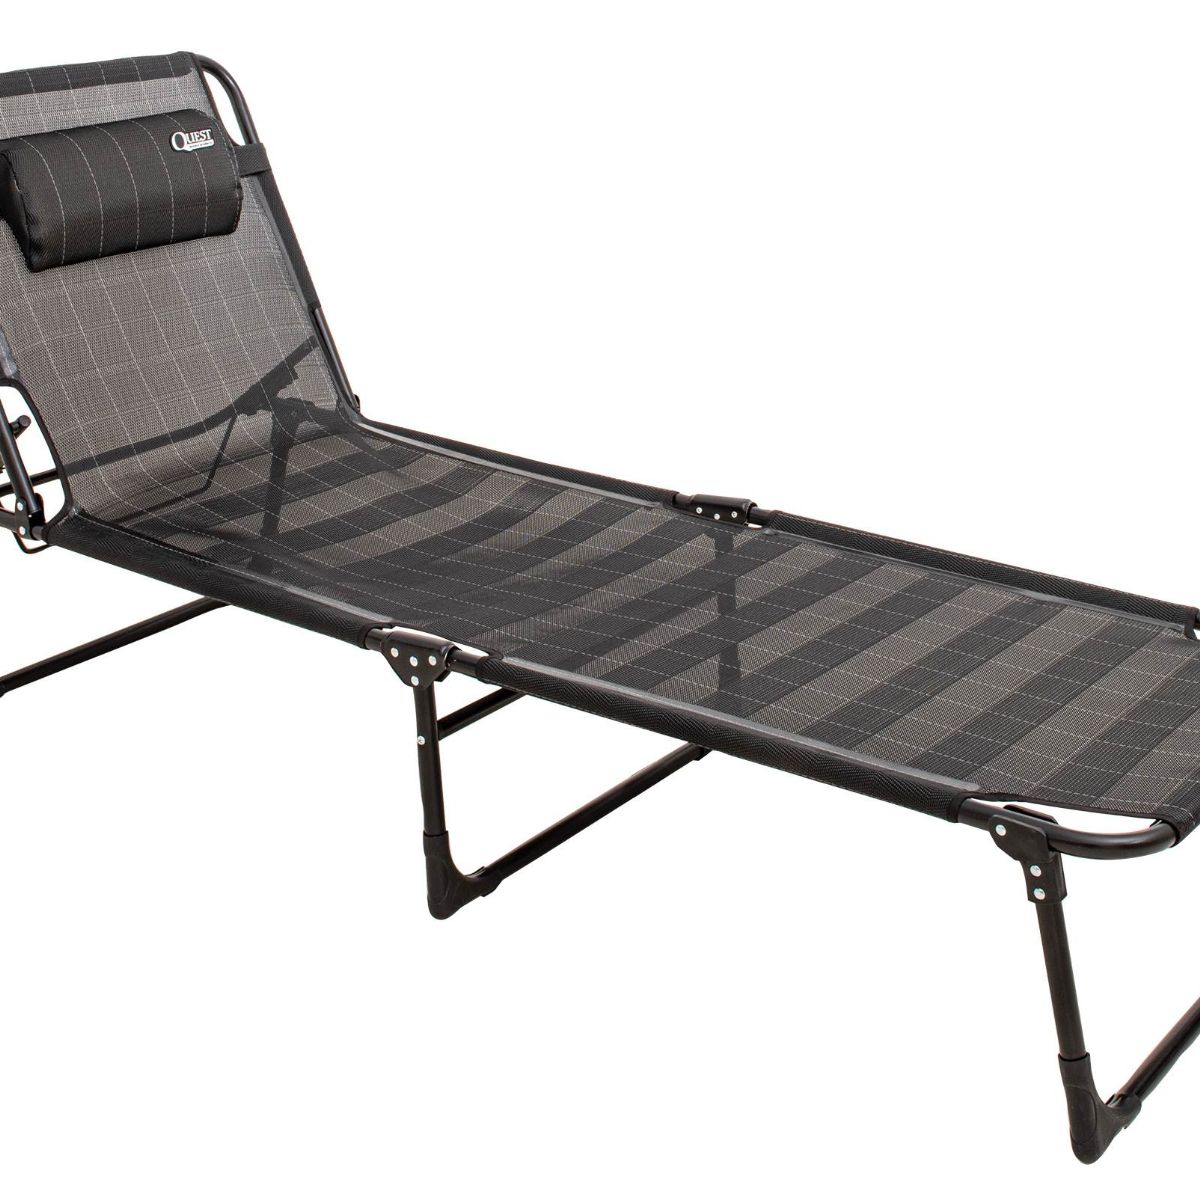 Silver/Black Quest Ragley Pro Lounge Chair with Side Table